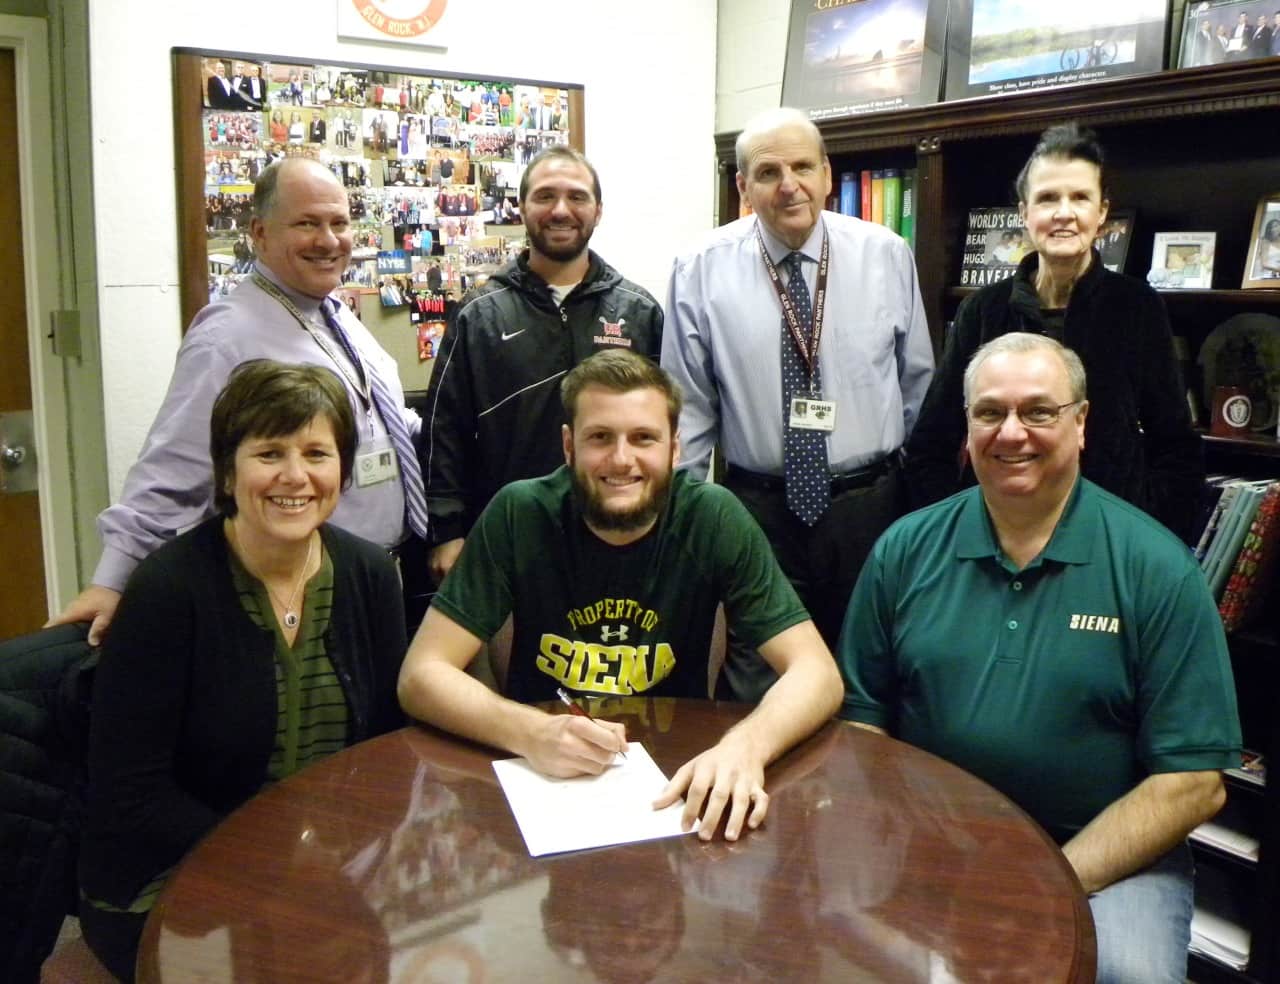 Glen Rock High School senior Tommy Pulzello is joined by his parents Mary Jane and Fred Pulzello as he signs his commitment letter to play Division 1 lacrosse for Siena College in New York. 